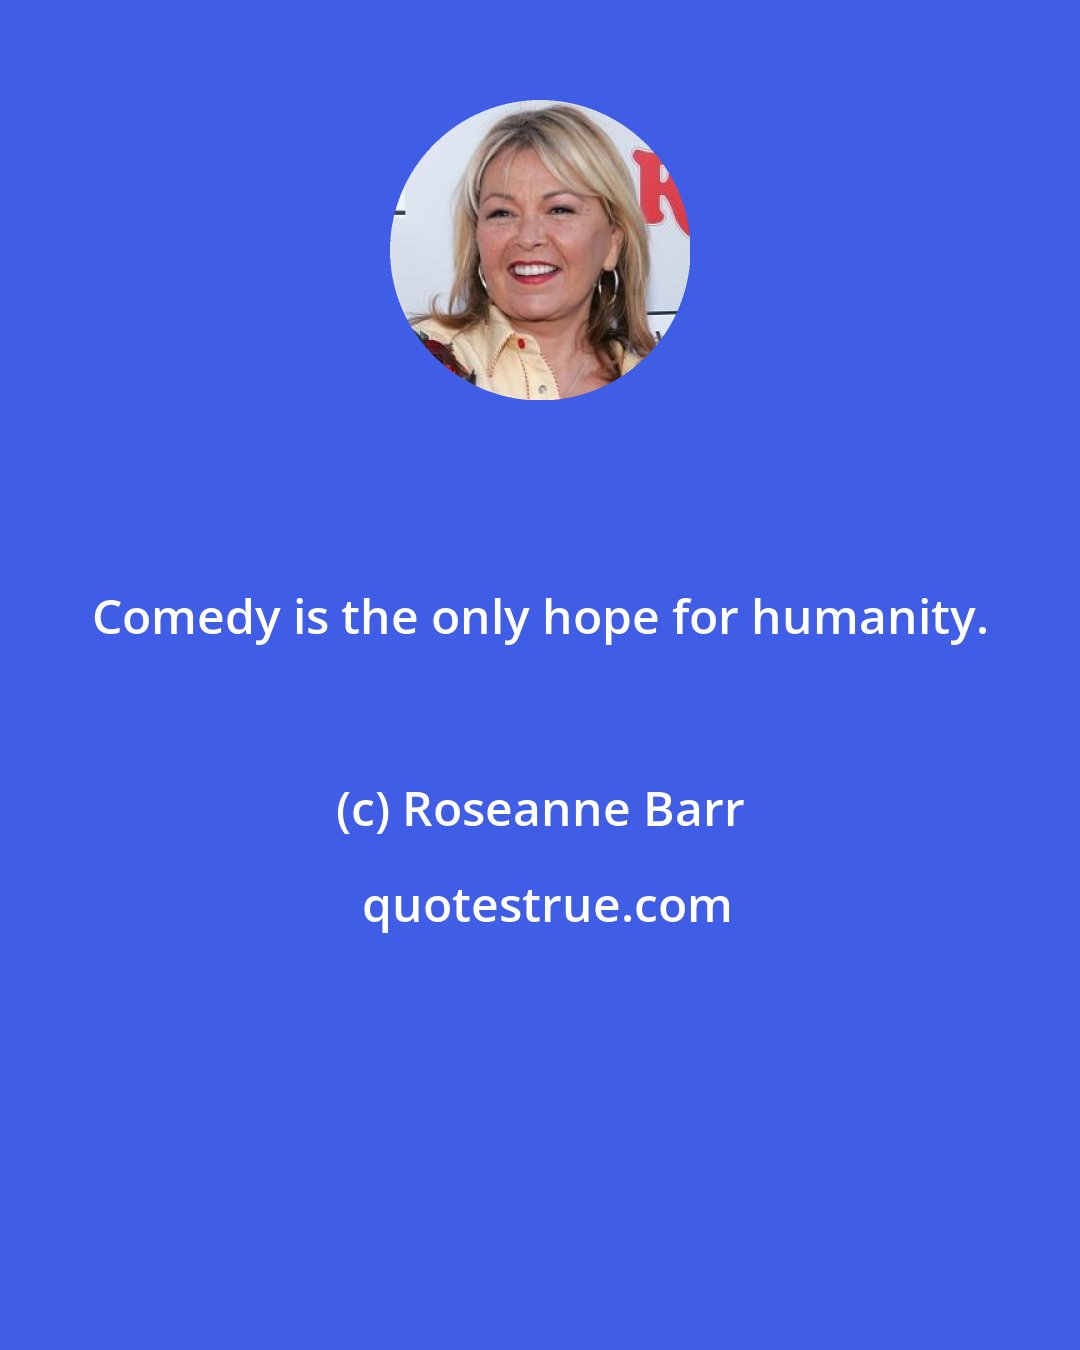 Roseanne Barr: Comedy is the only hope for humanity.